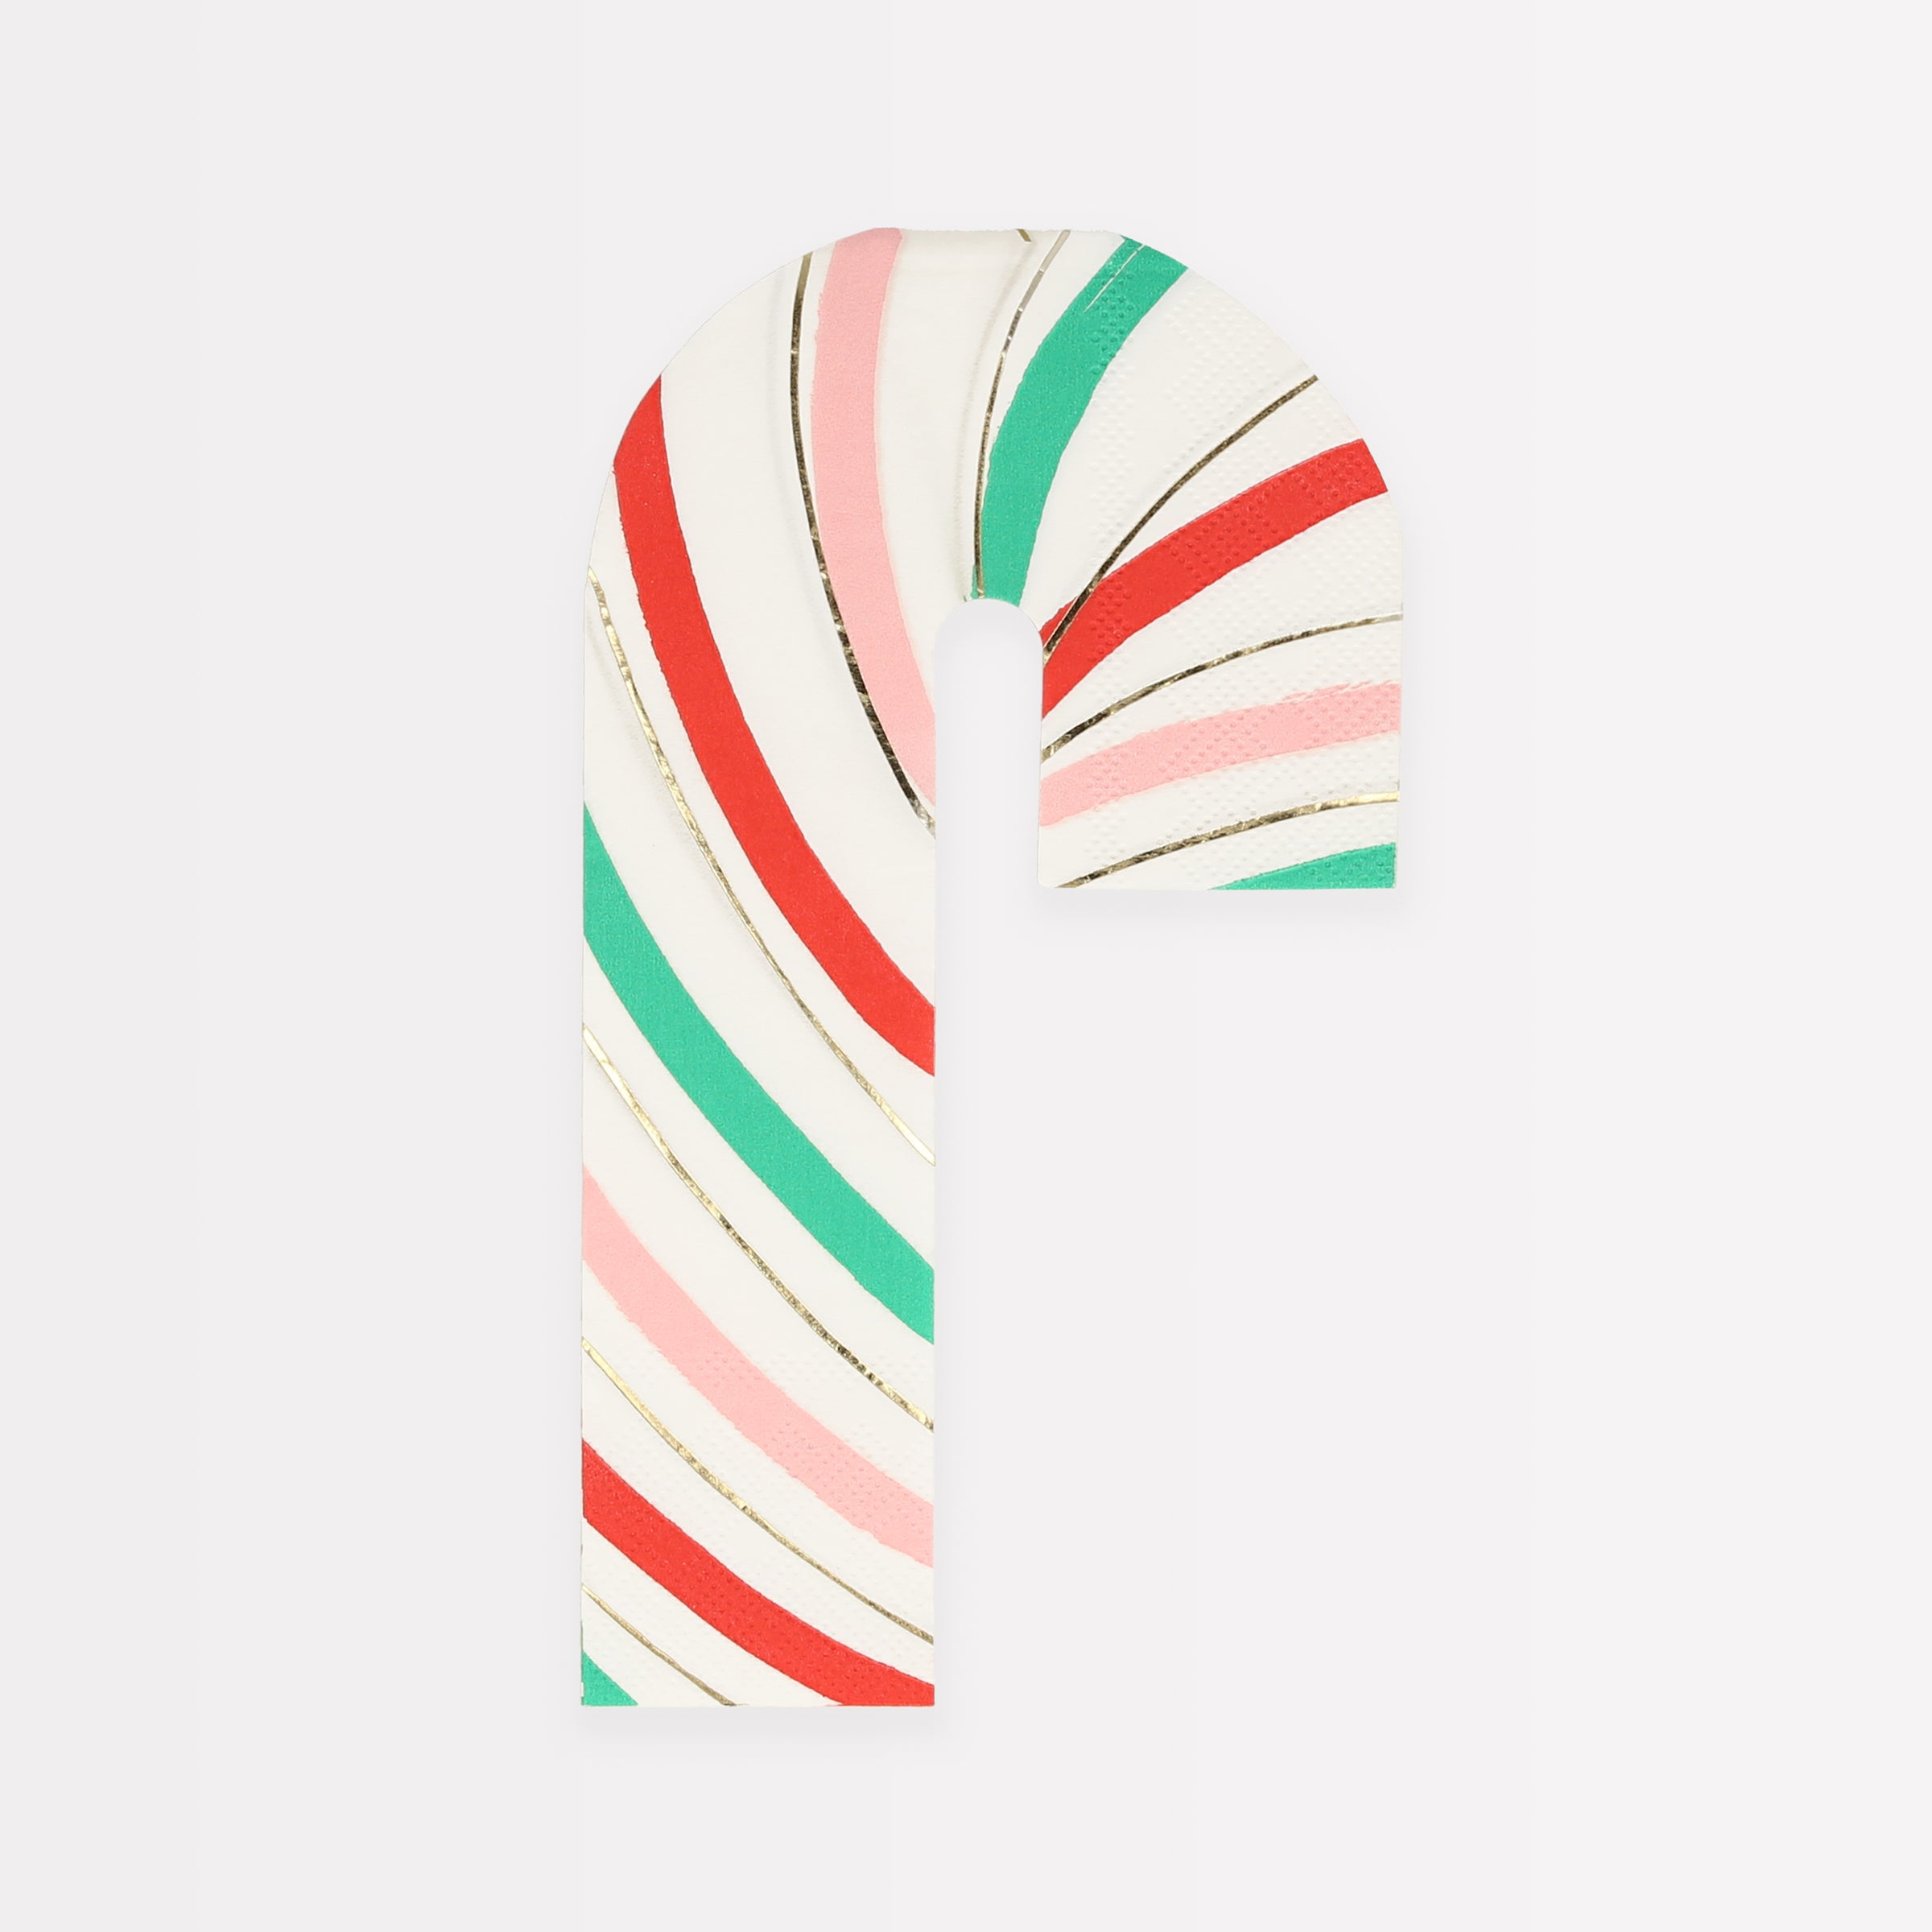 Our party napkins, designed to look like candy canes, are great for a Christmas cocktail party or for Christmas table decorations.